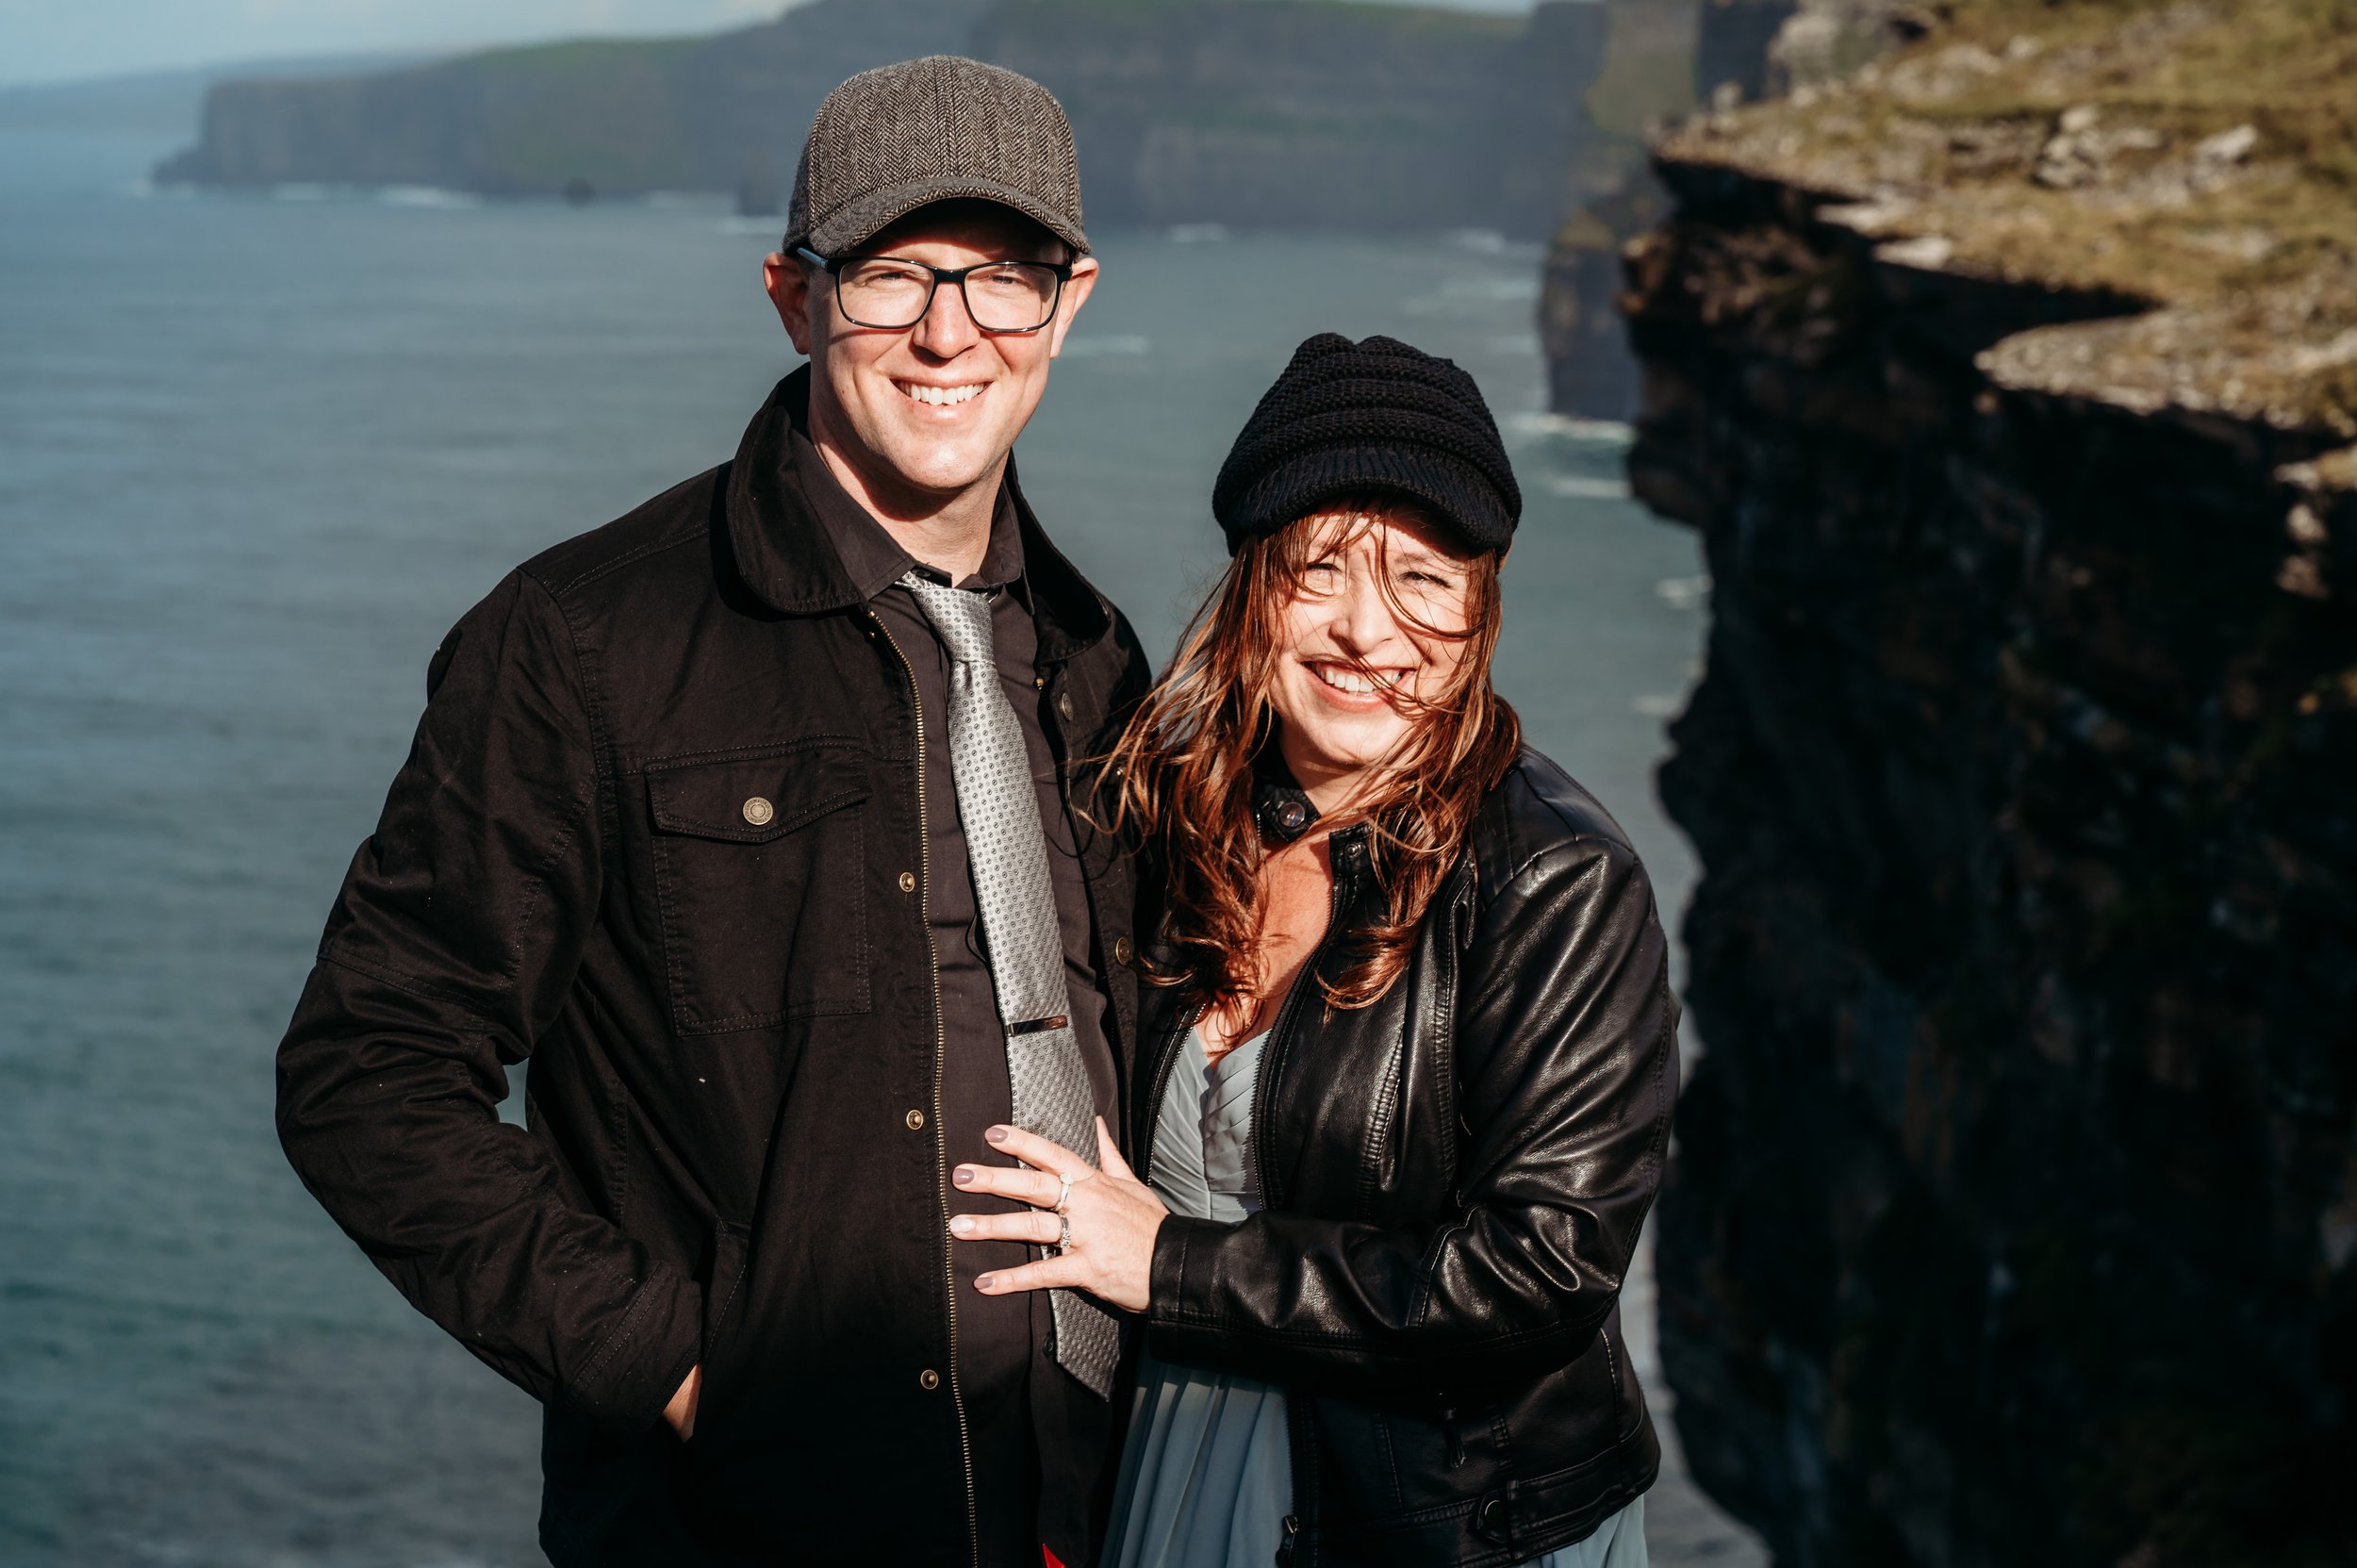 Marie O'Mahony photographer Cliffs of Moher anniversary couples photo session proper photo at the cliffs